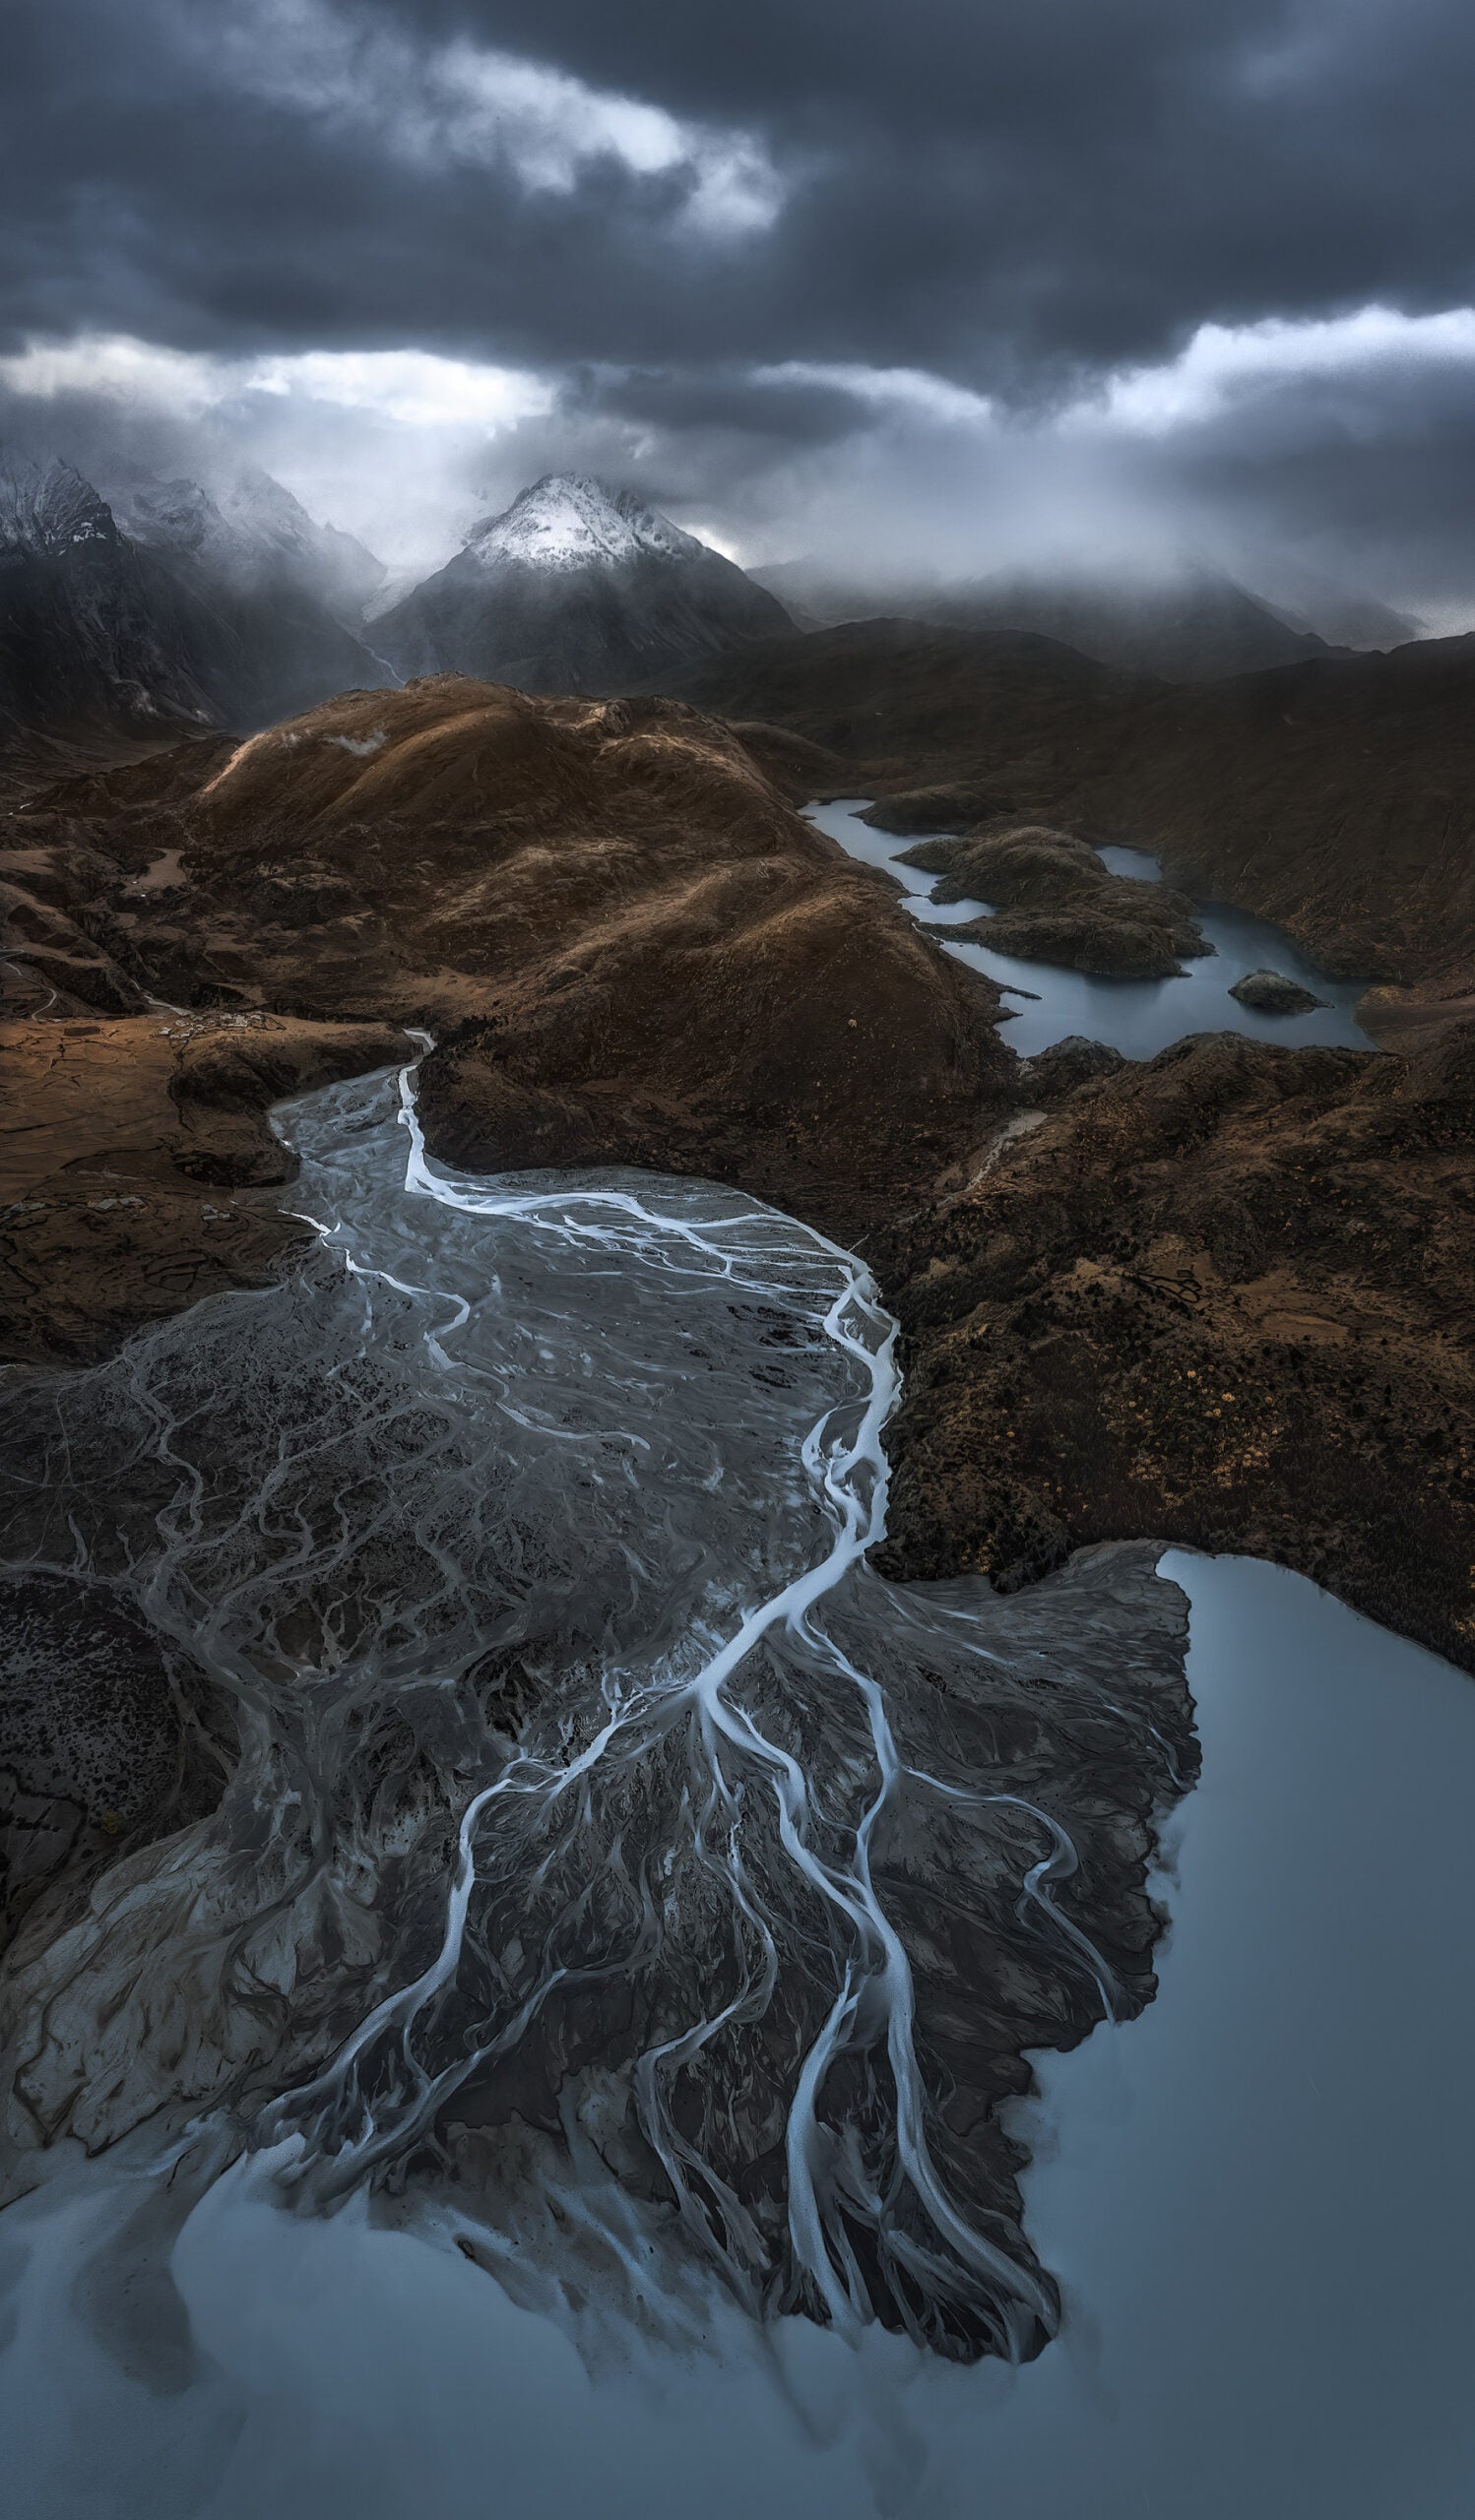 A moody landscape photo with mountains, rivers, streams, and a very cloudy sky.